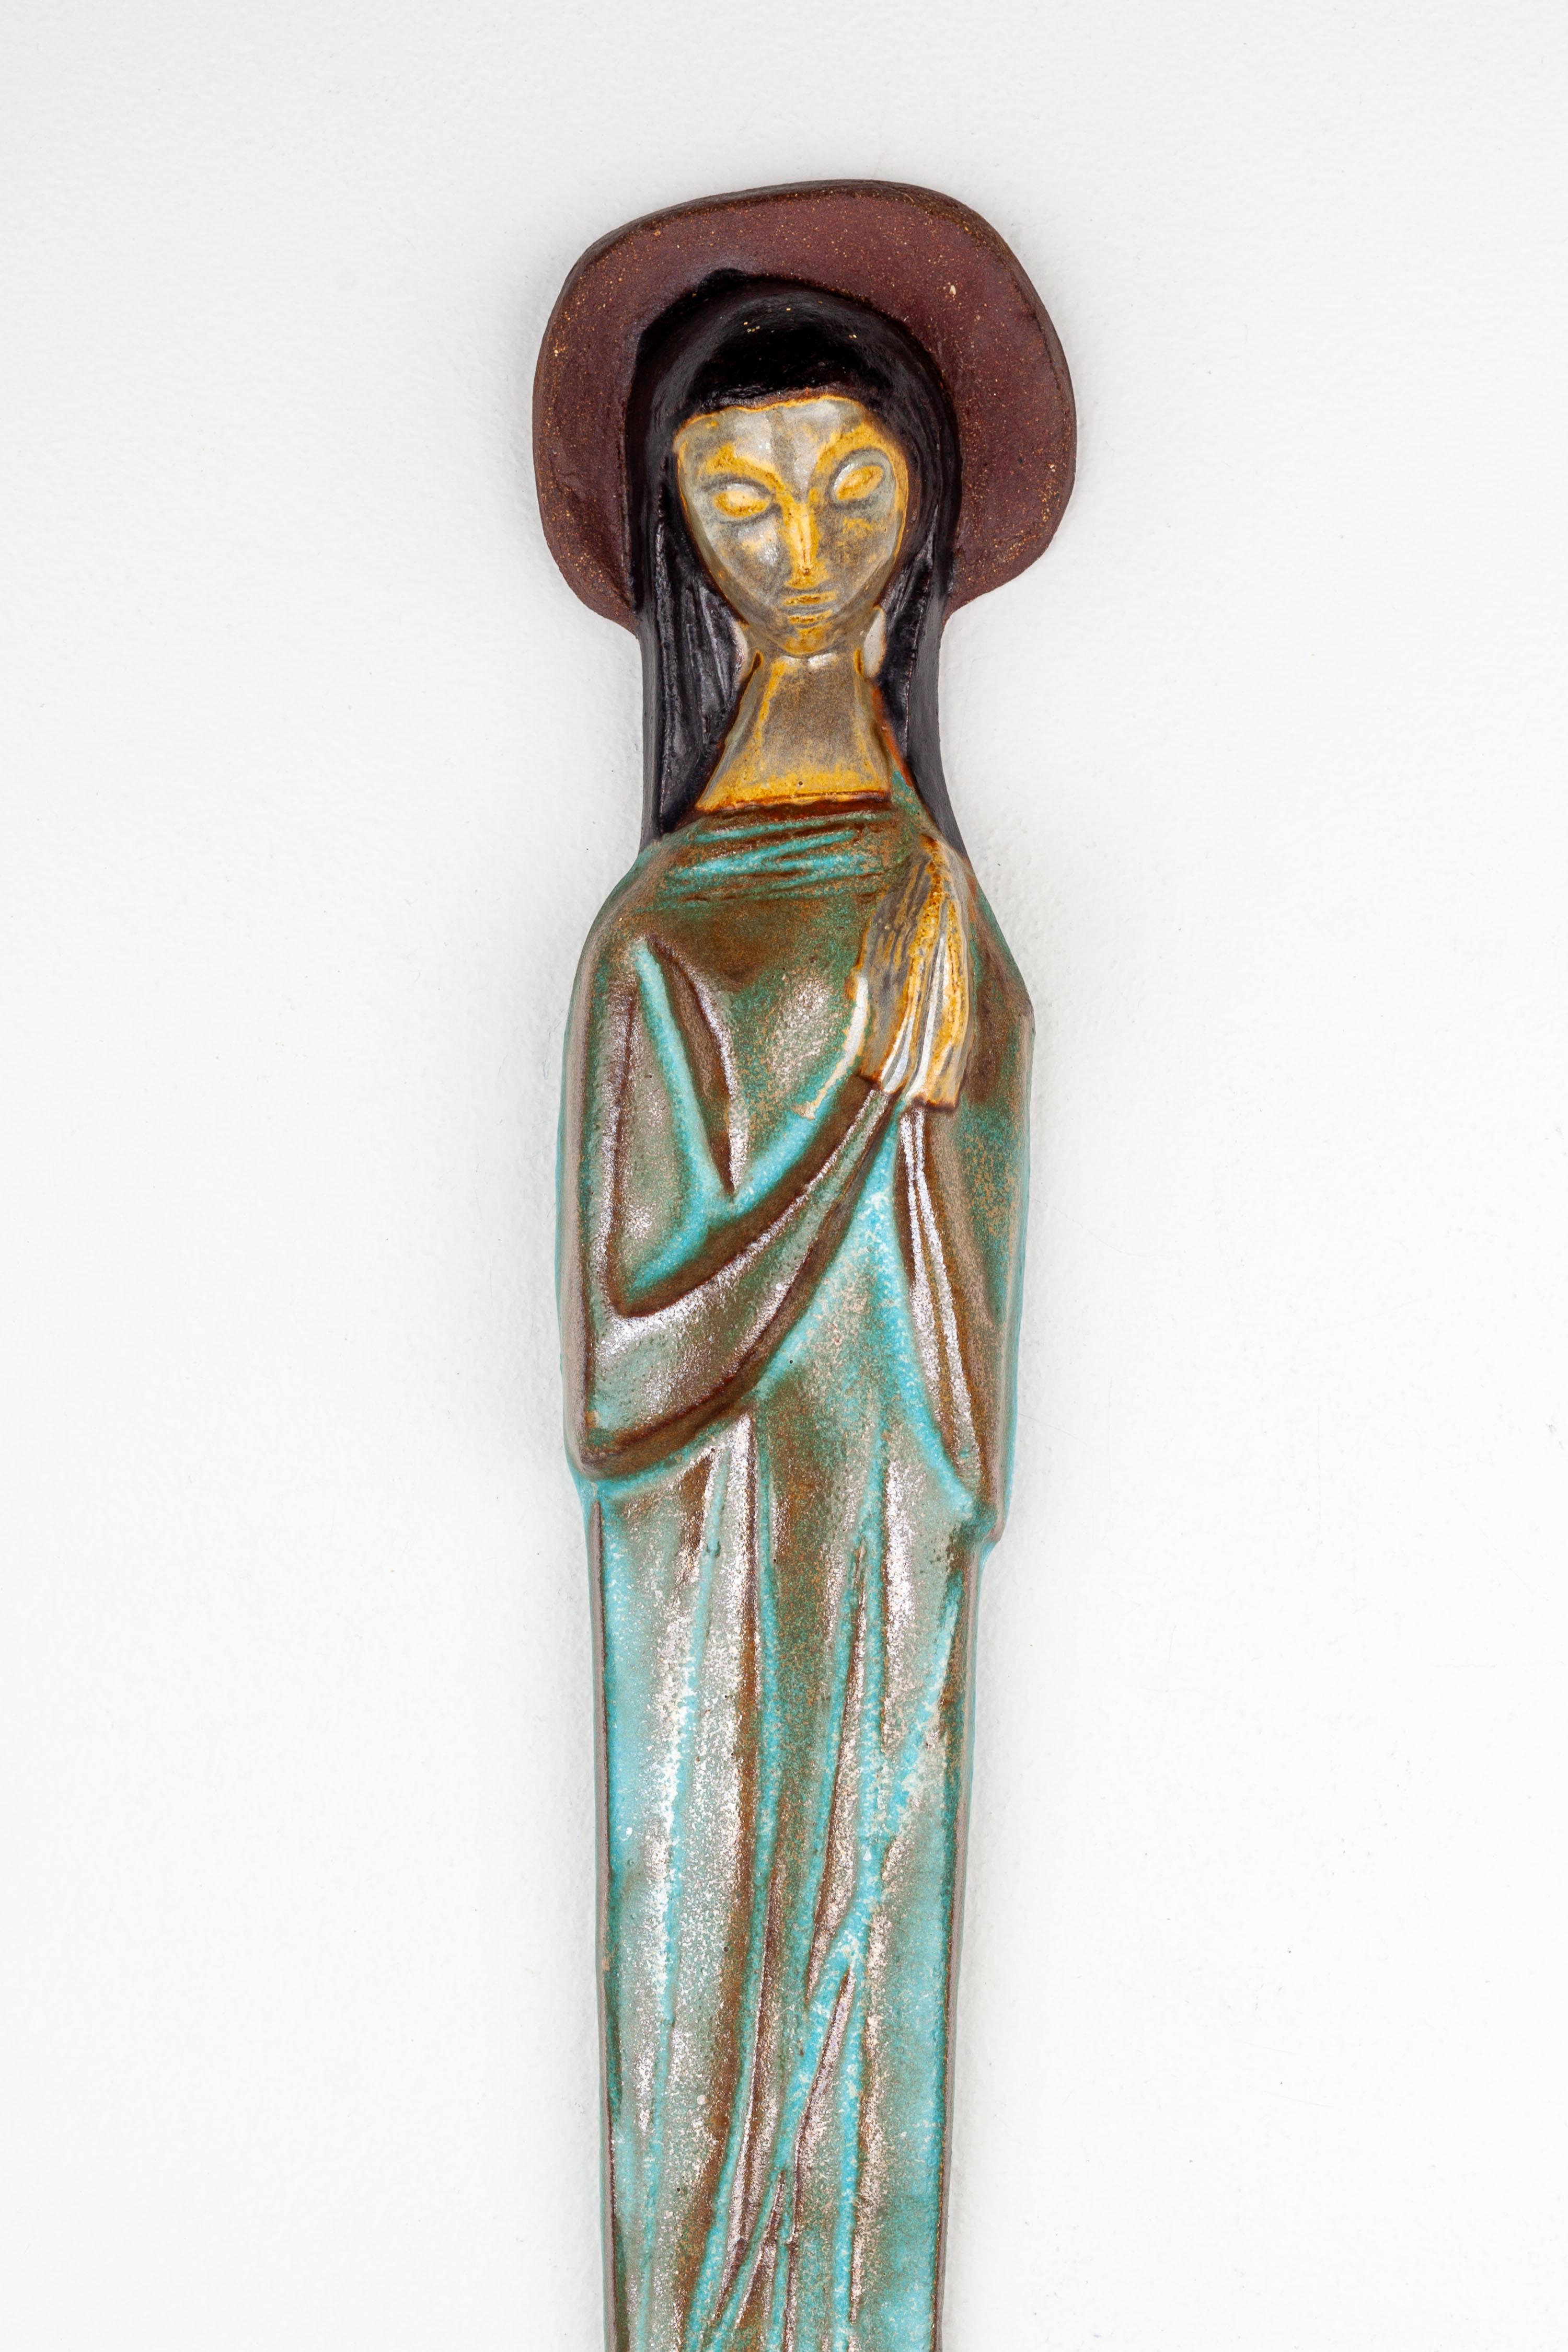 This elegant ceramic representation of the Virgin Mary is a superb example of mid-century modern craftsmanship, hand-formed by a skilled European studio pottery artist. The figure captures Mary in a state of serene contemplation, her posture and